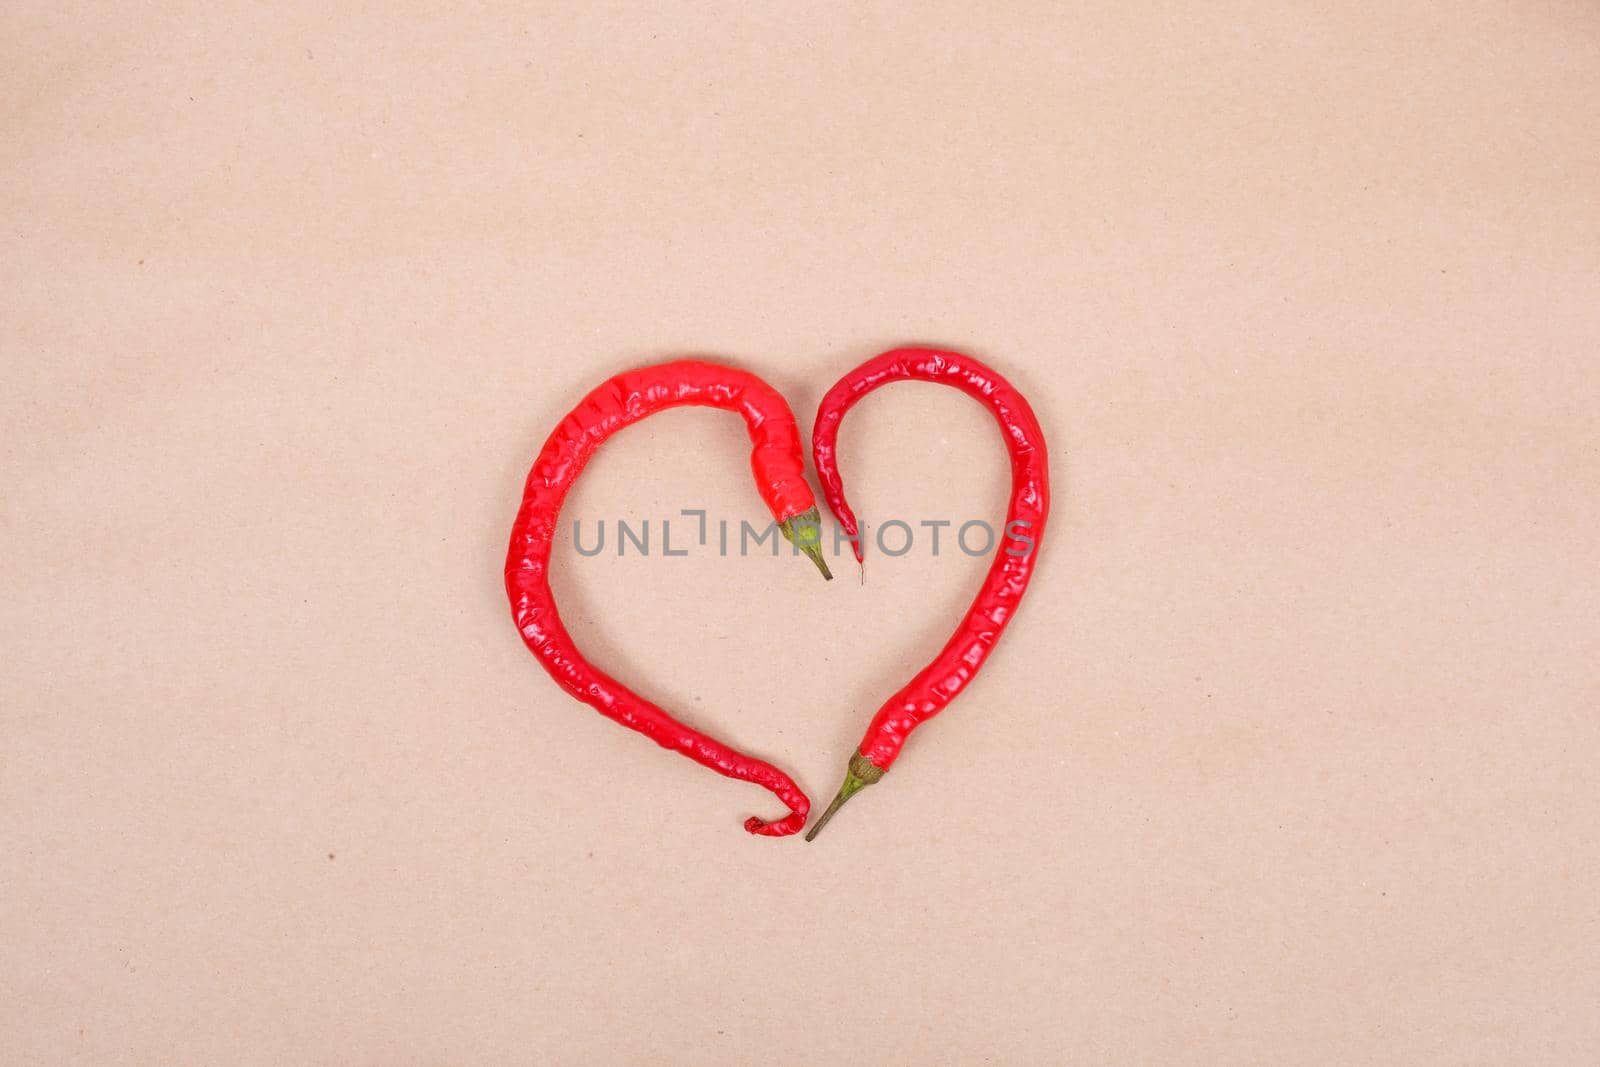 red chile pepper in the form of a heart